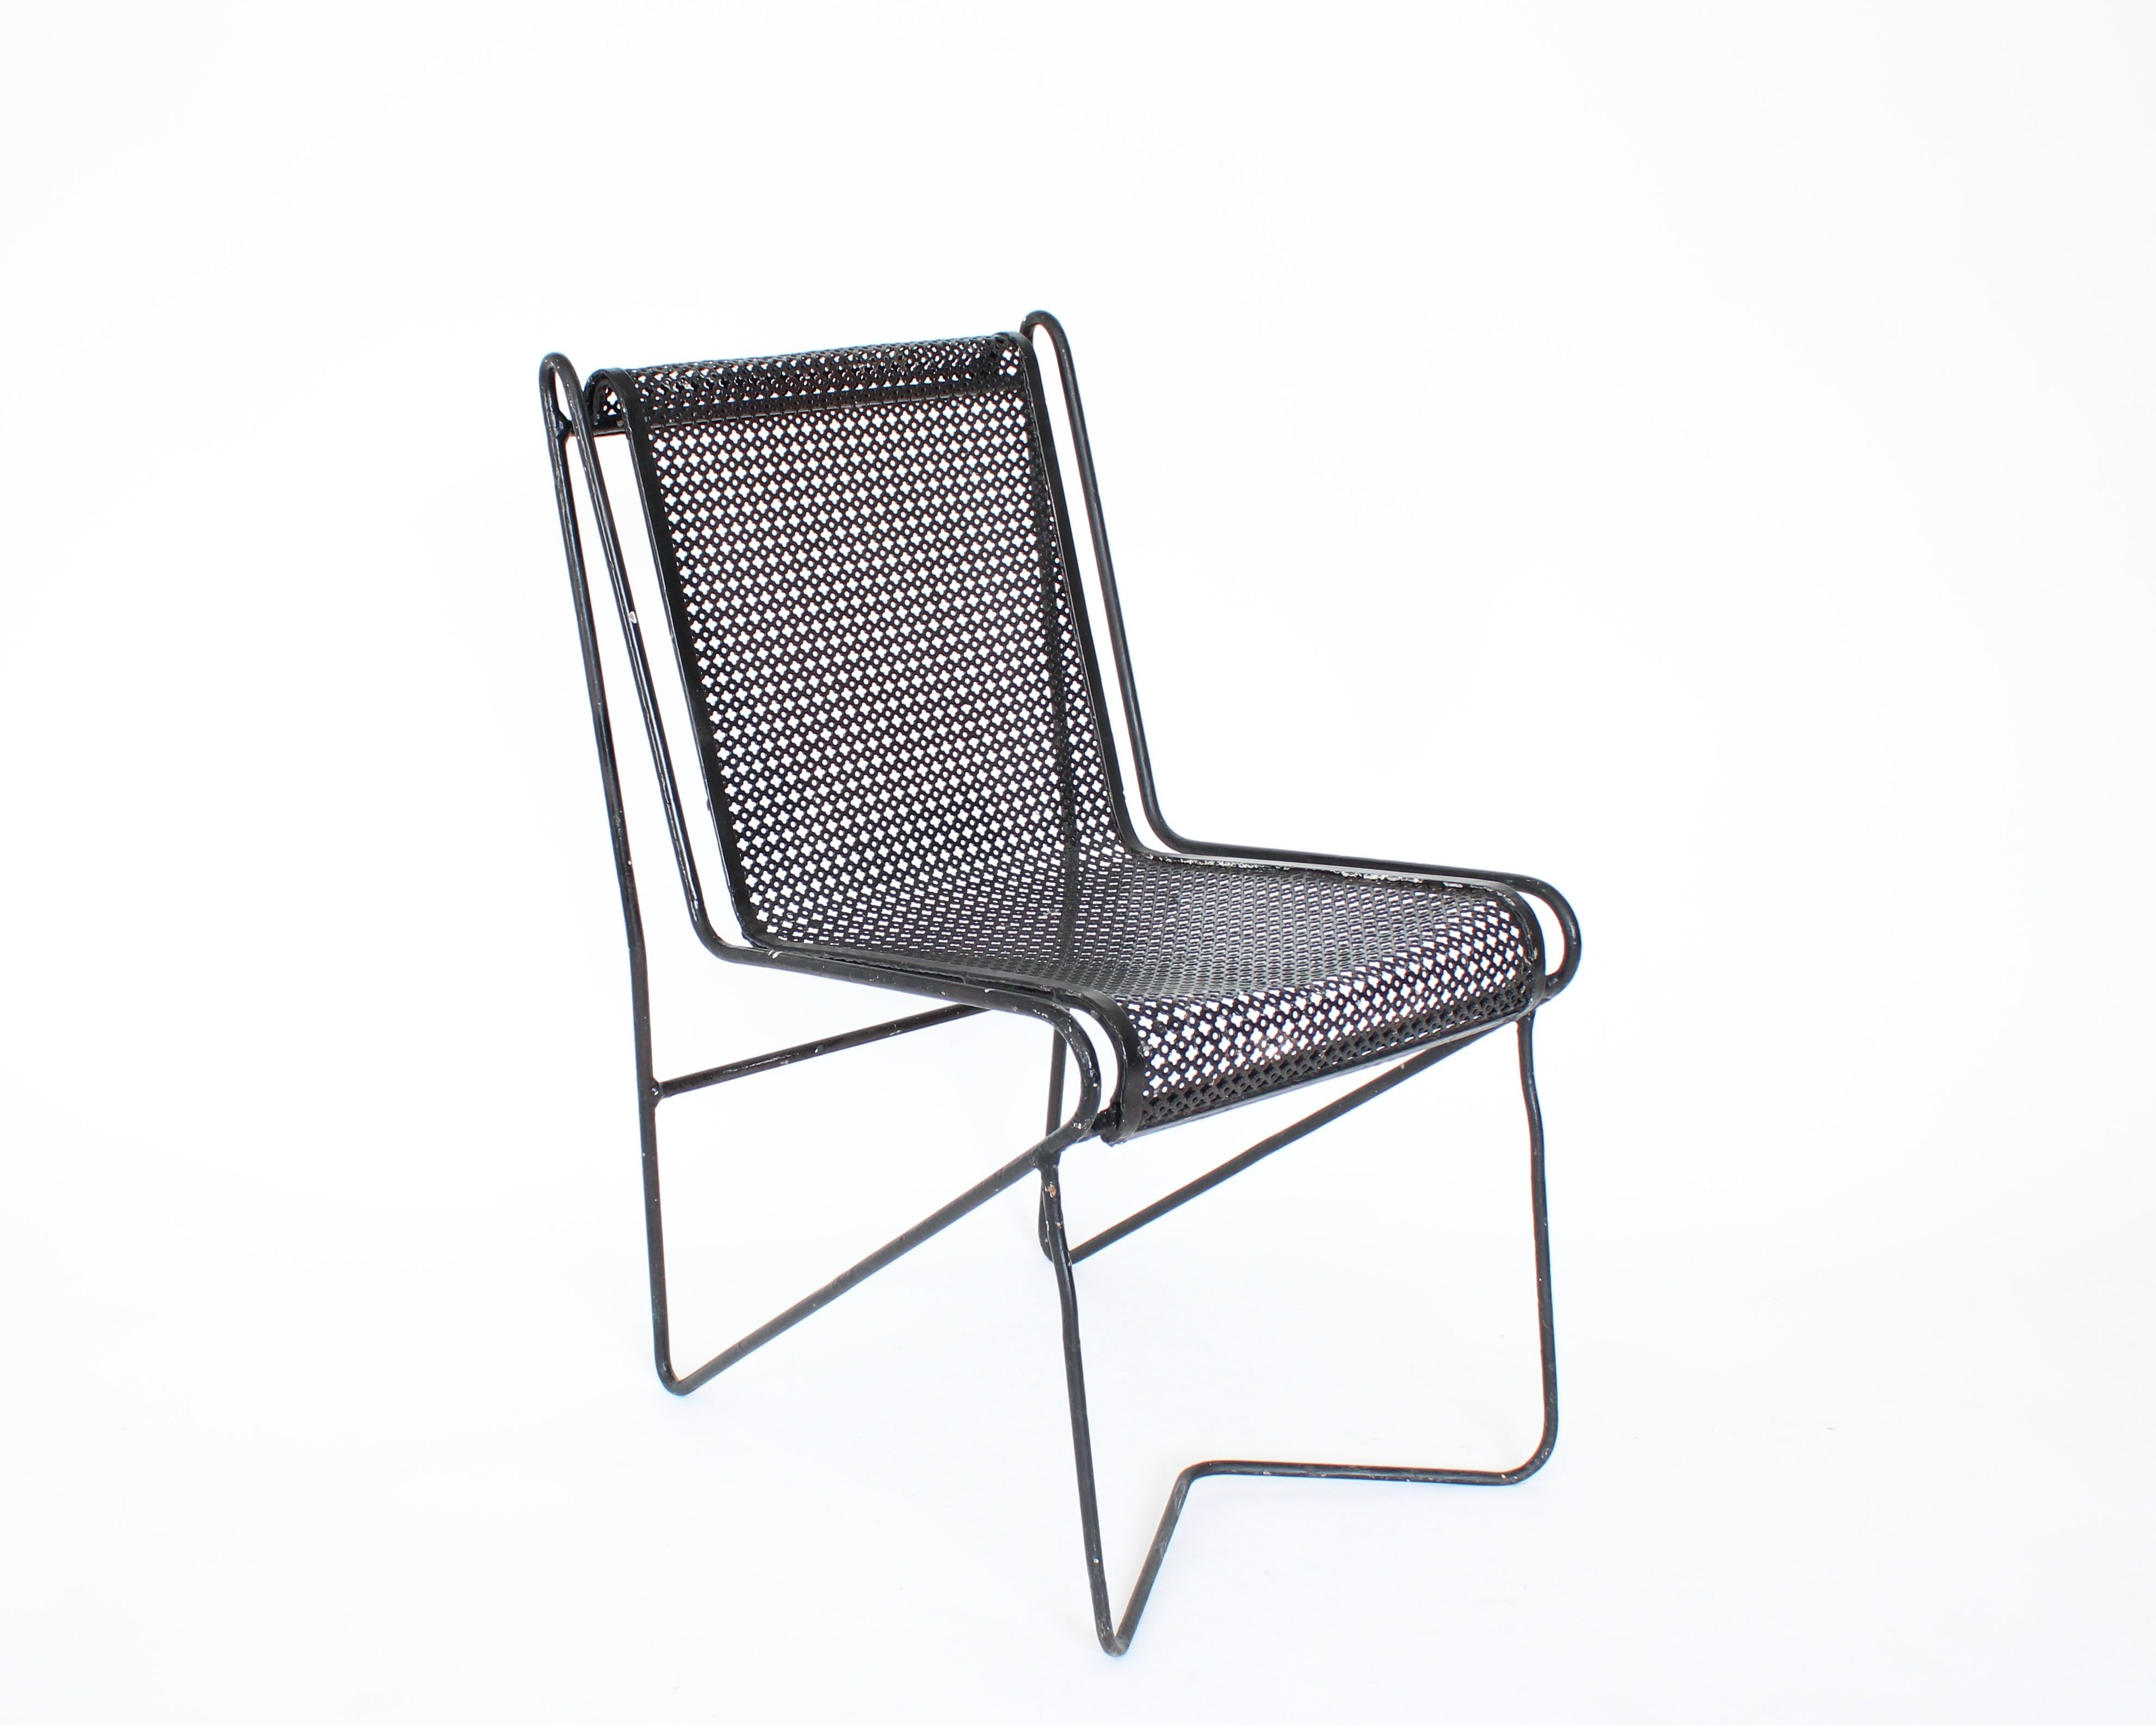 French designer Mathieu Mategot black painted perforated metal side chair. Many of Mategots' designs were intended for outdoor garden use thus painted and often repainted by the owners. 
This chair is similar in style to the period of him working